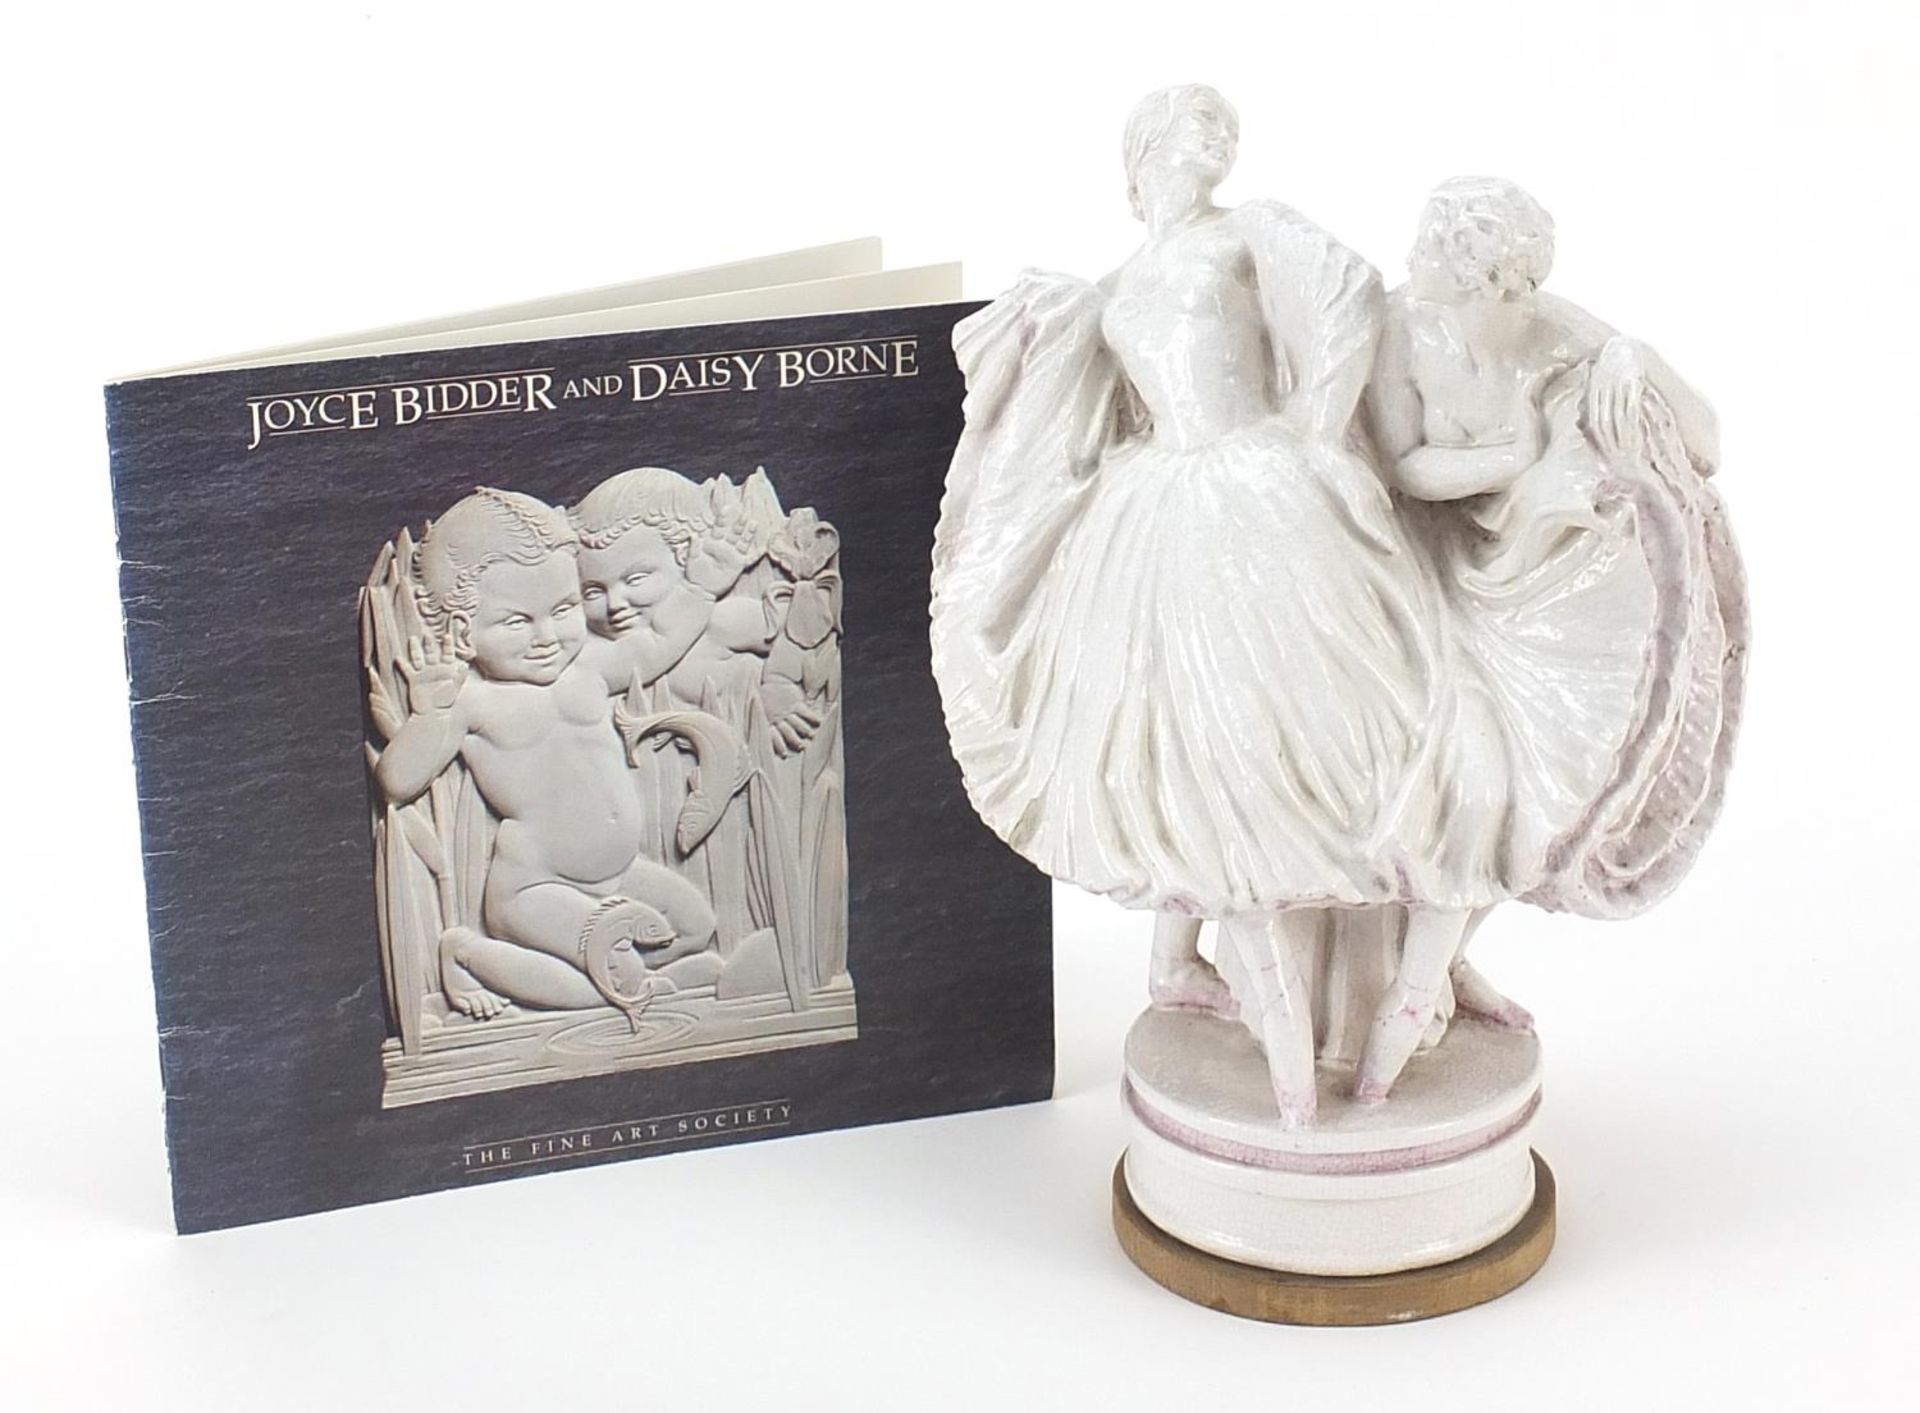 Joyce Bidder, contemporary cream glazed group of two dancers, with Fine Arts Society booklet, 26cm